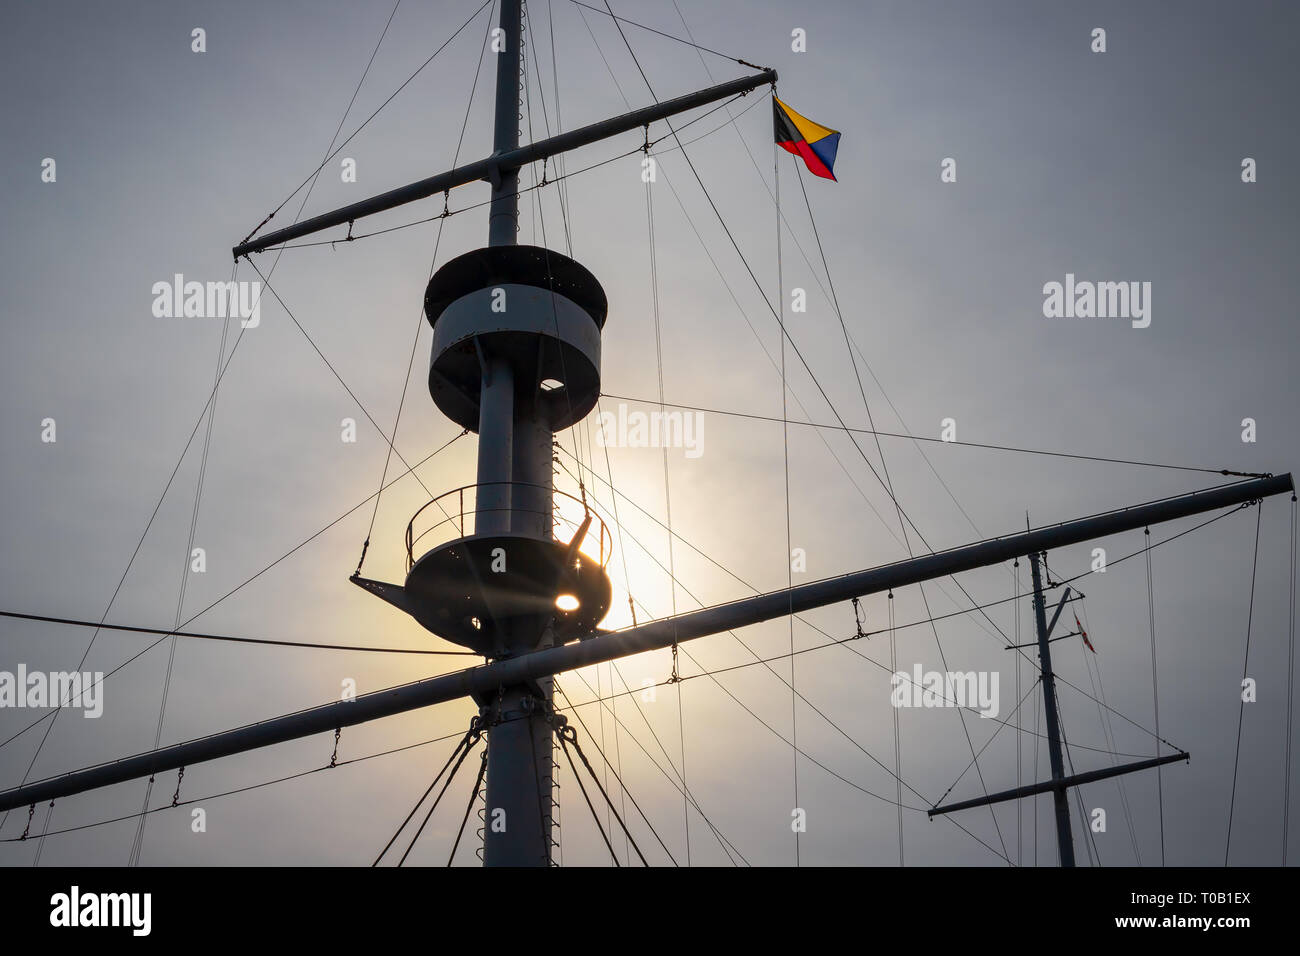 The sun breaking through clouds on the mast of an old sailing ship on Japan’s east coast. Stock Photo